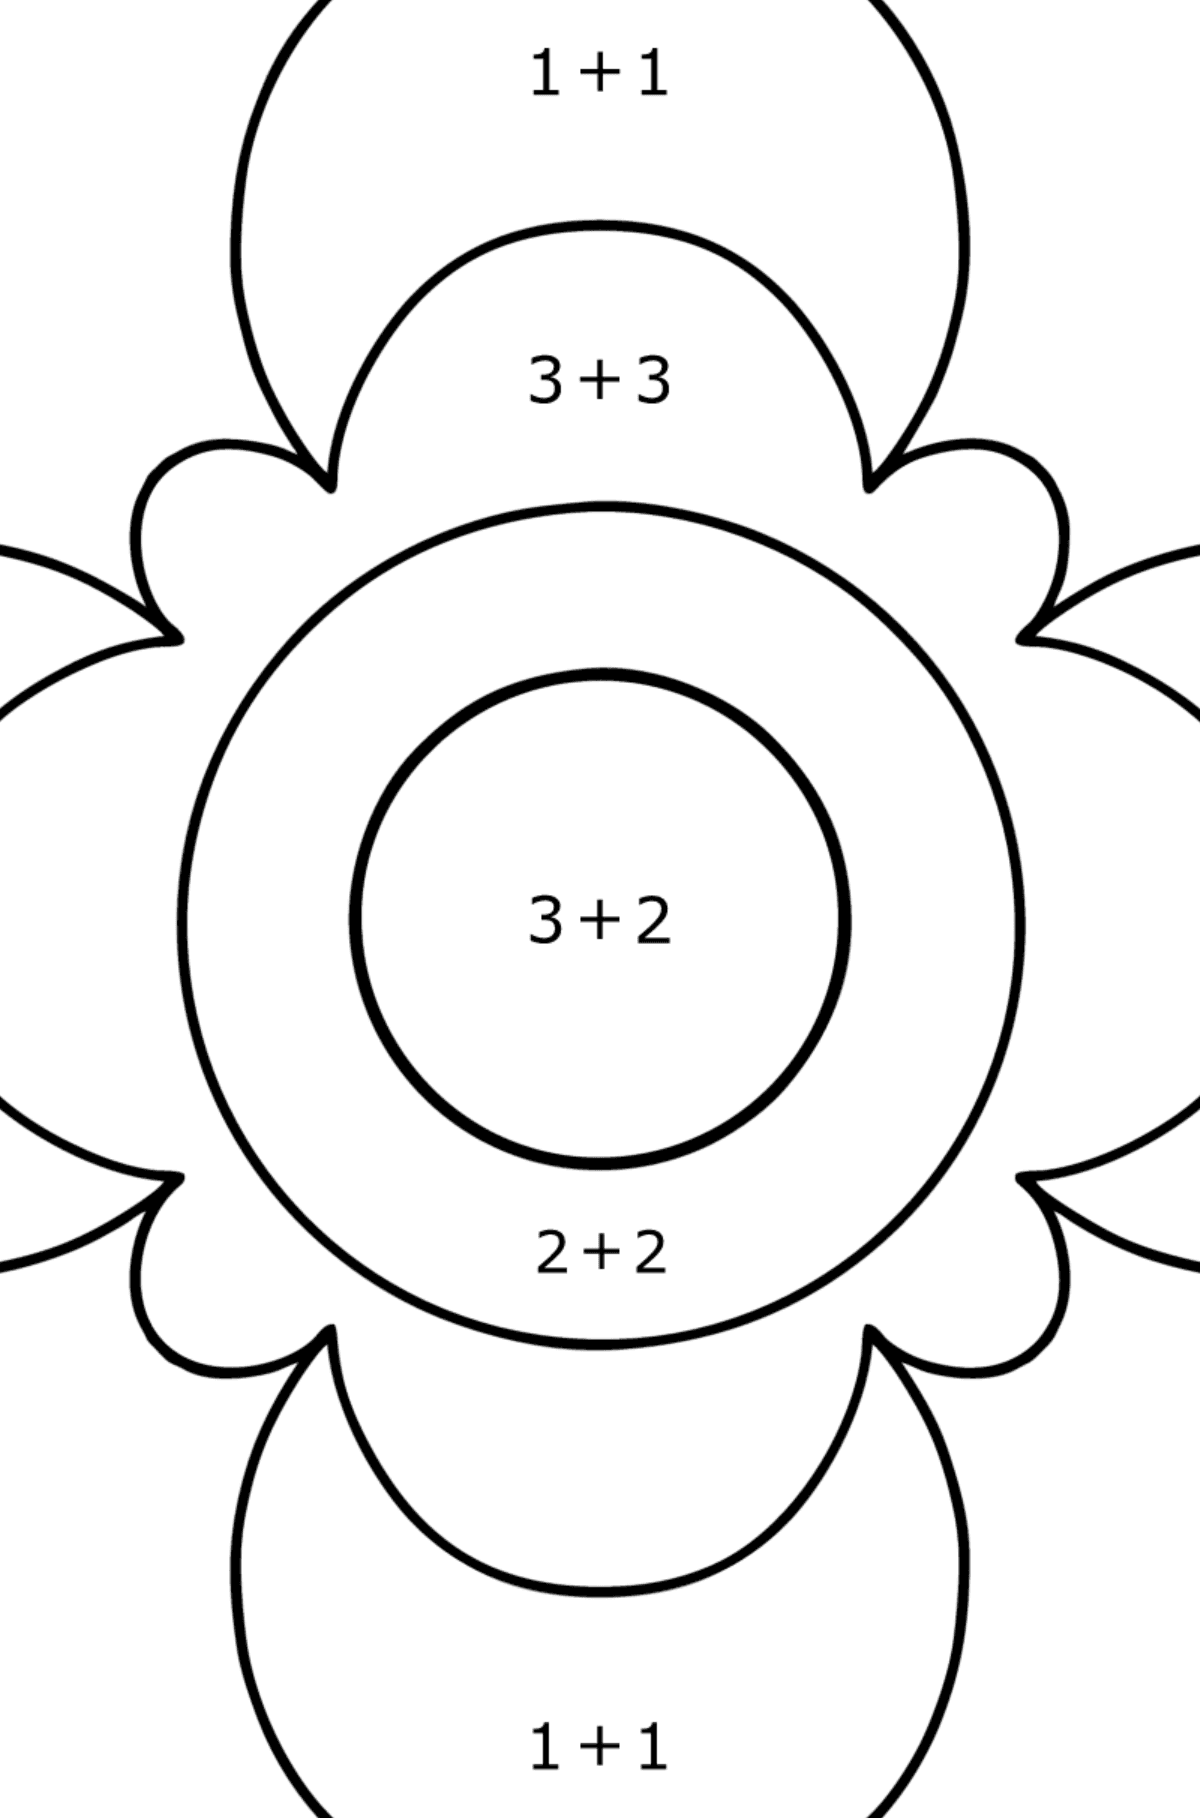 Coloring Anti stress flower for kids - Math Coloring - Addition for Kids